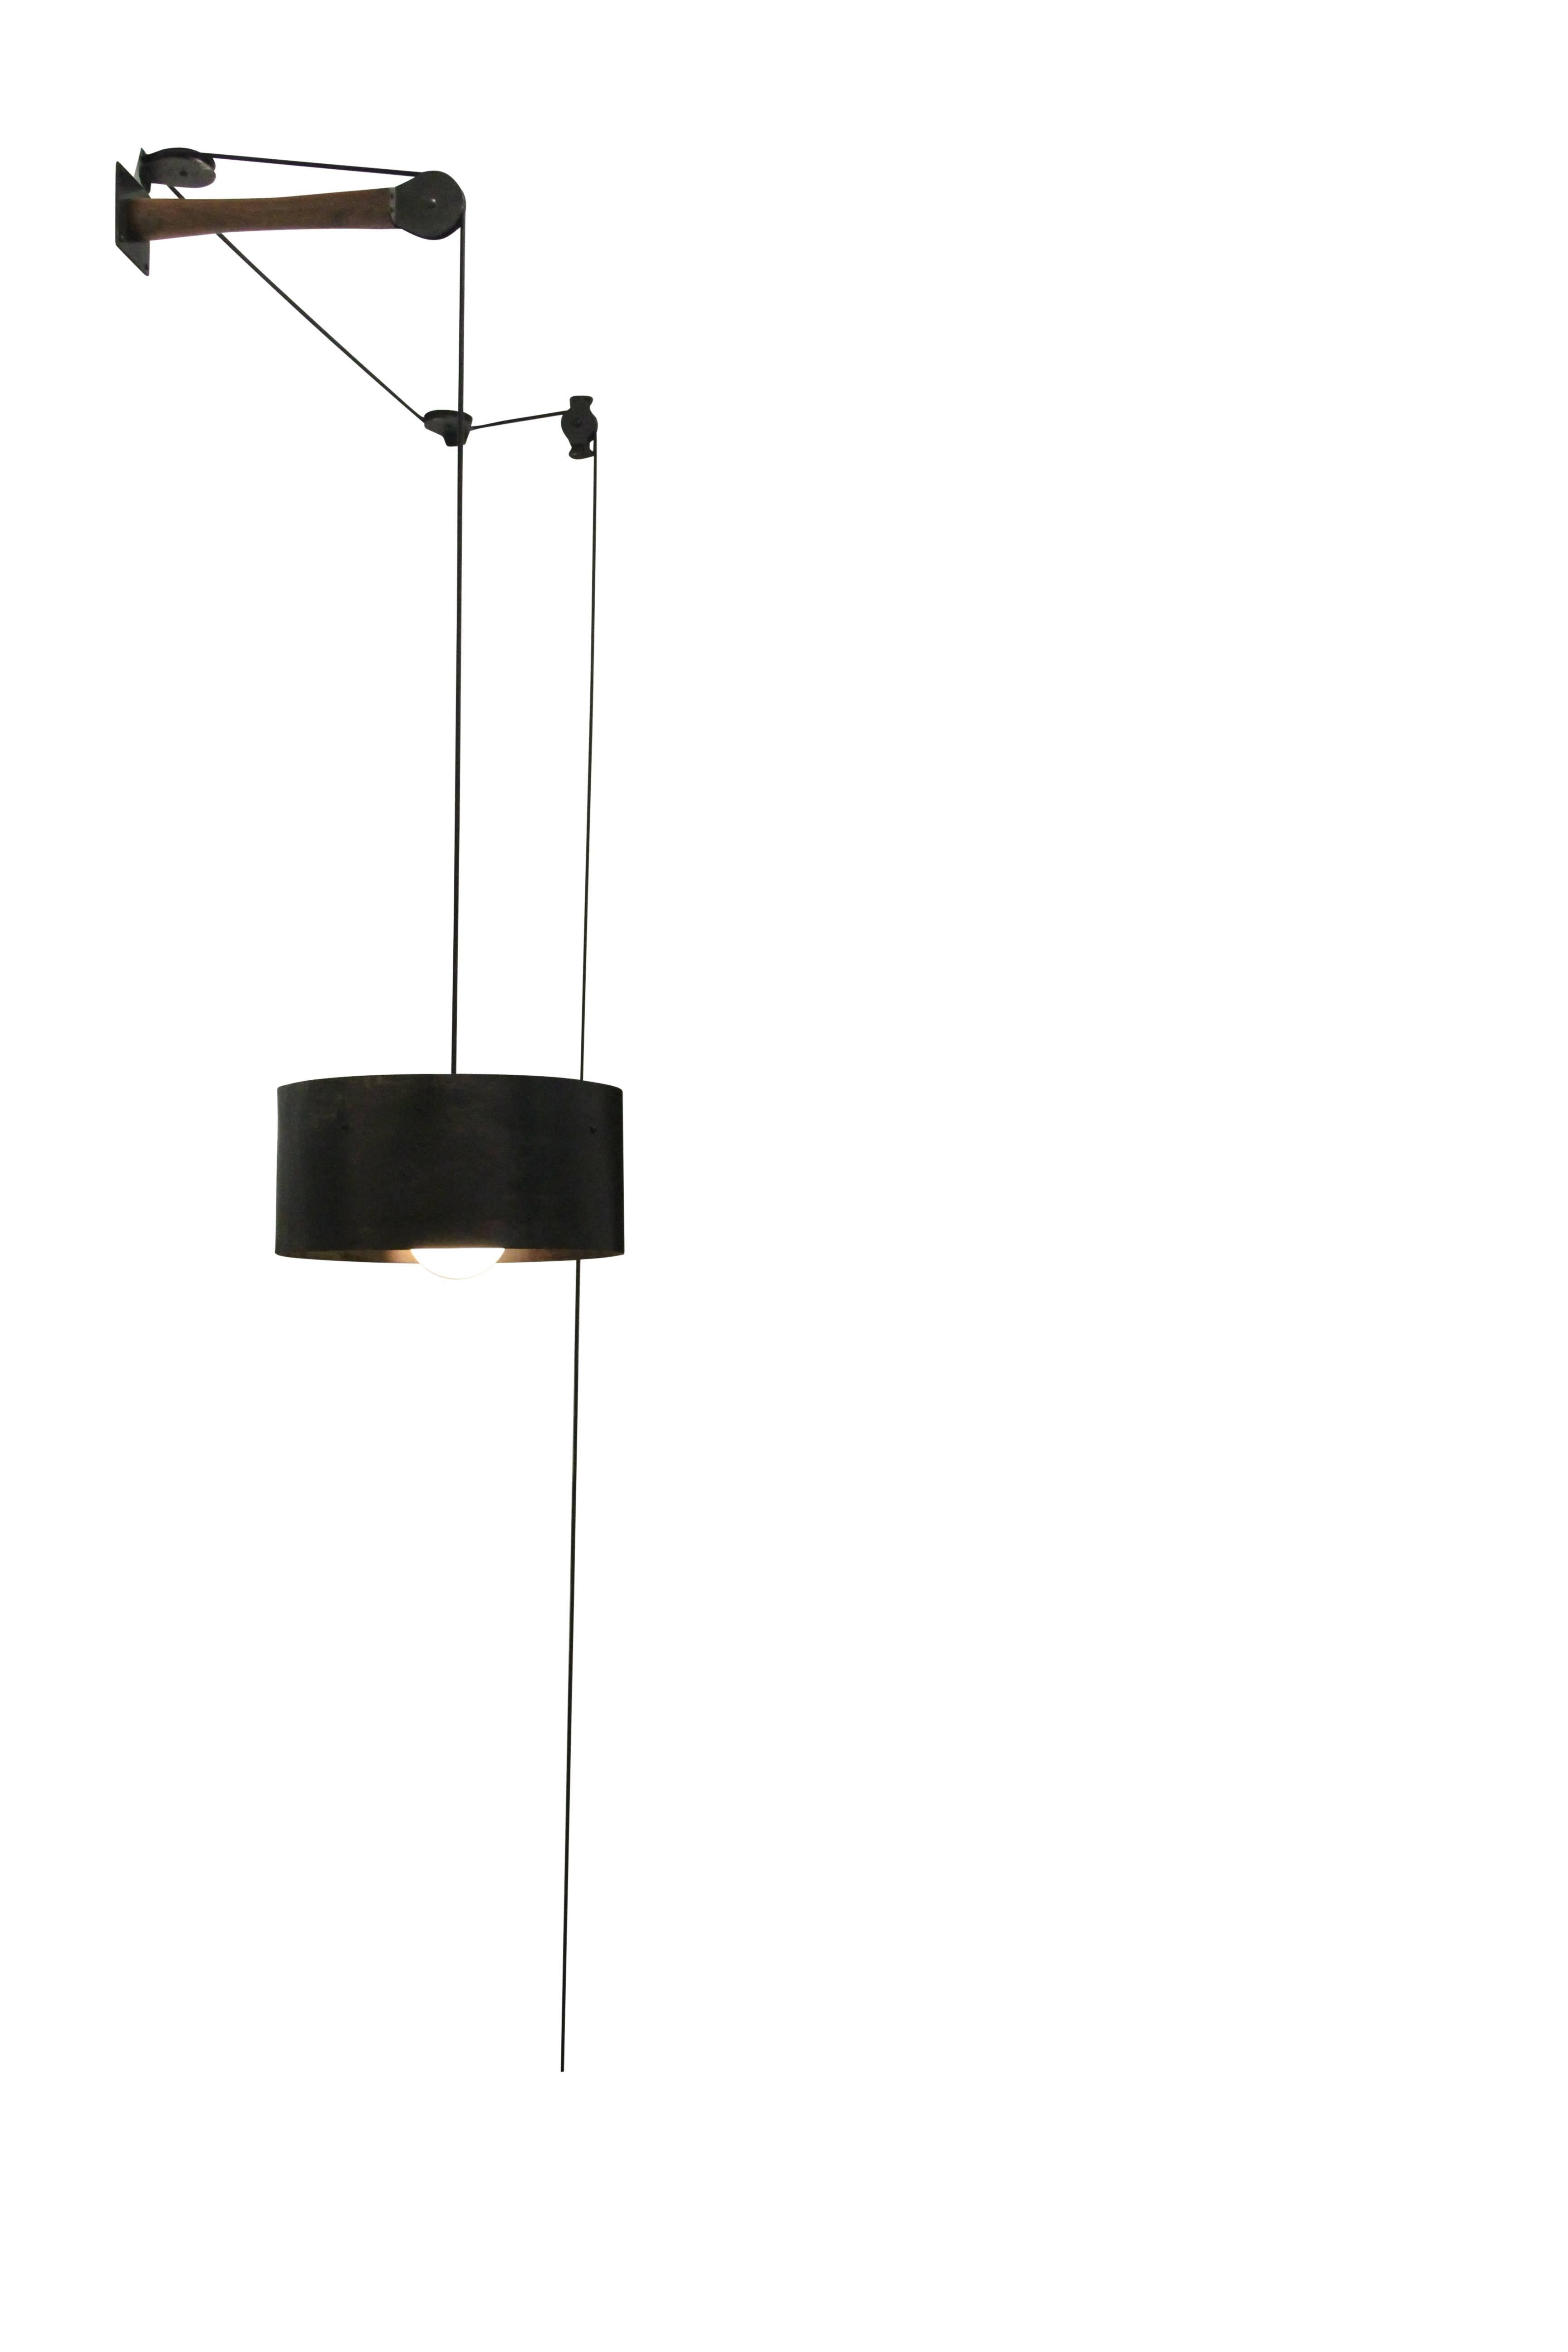 The pulley light is a truly dynamic piece. The light is easily raised and lowered utilizing pulleys, whose unique arrangement allows for true customization for each space. The shade is made from hand-bent cold-rolled steel which Stefan Rurak